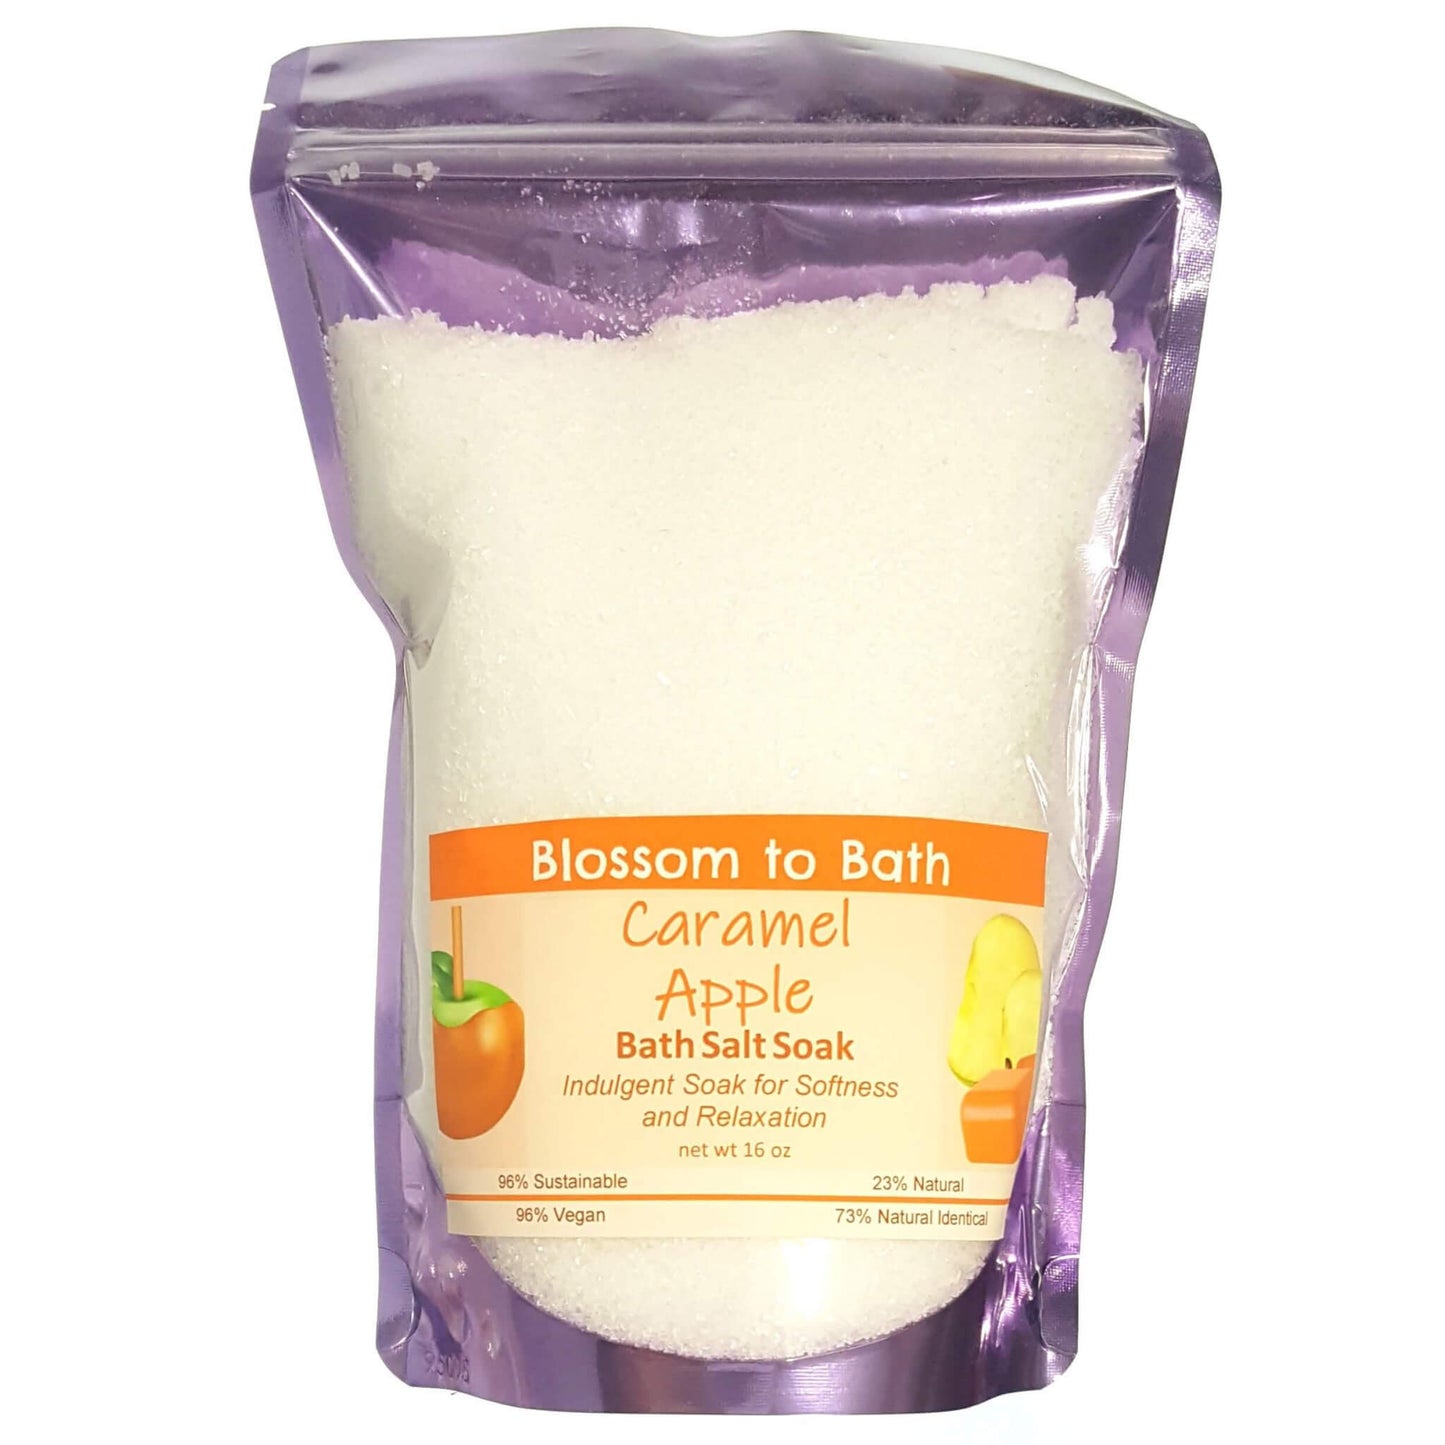 Buy Blossom to Bath Caramel Apple Bath Salt Soak from Flowersong Soap Studio.  Scented epsom salts for a luxurious soaking experience  Bright fresh apple and warm rich caramel - a joyful combination of crisp fruit wrapped in decadent sweetness.